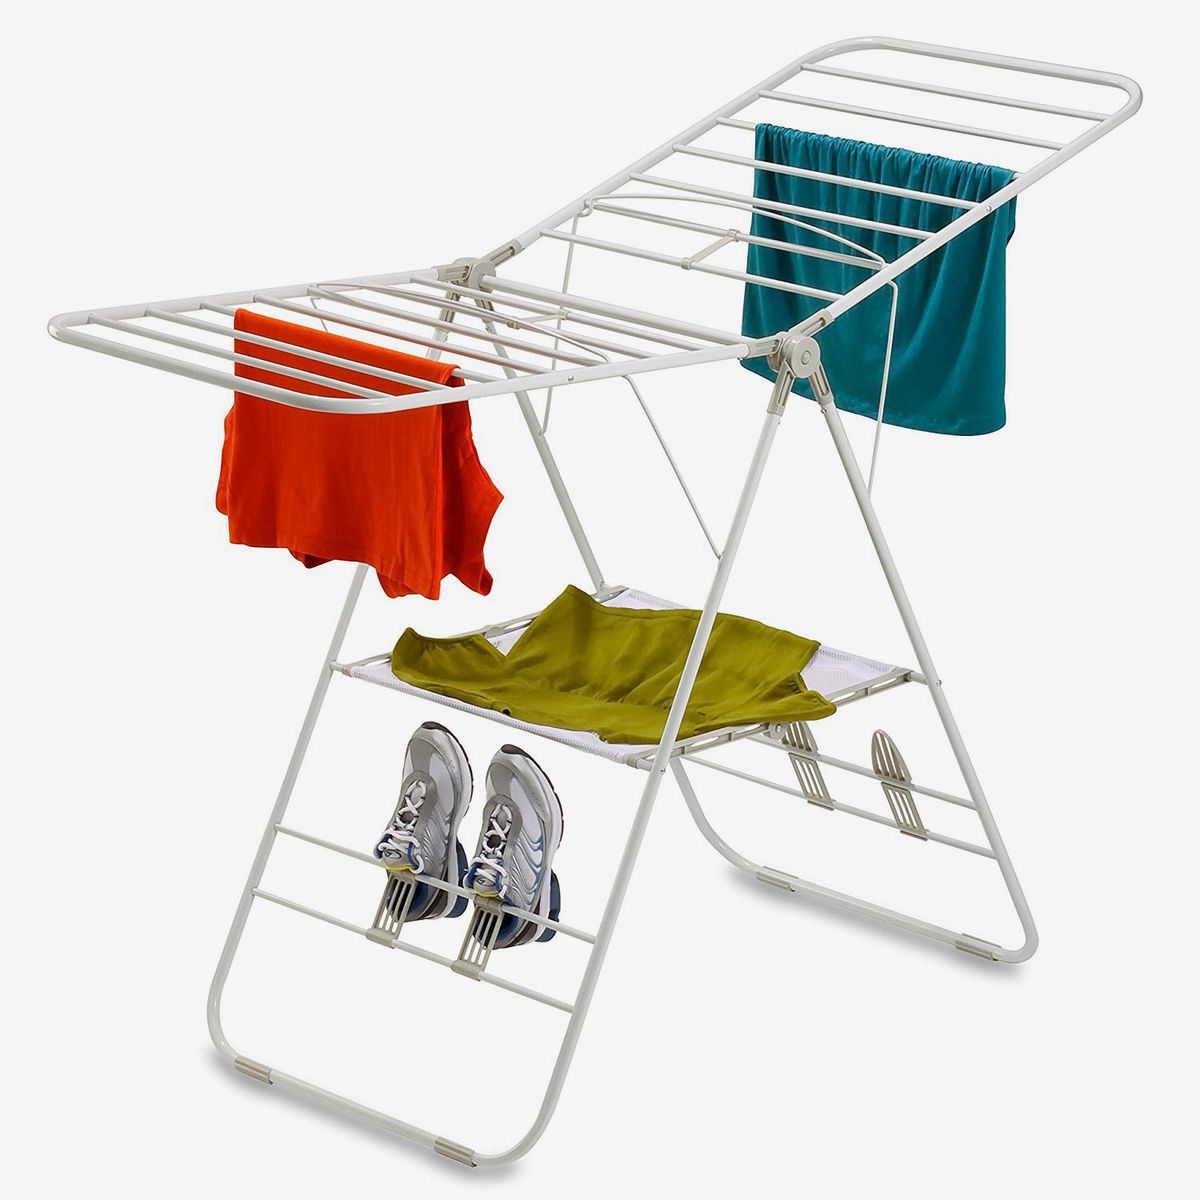 Folding Household Clothes Drying Rack Laundry Folding Hanger Dryer In